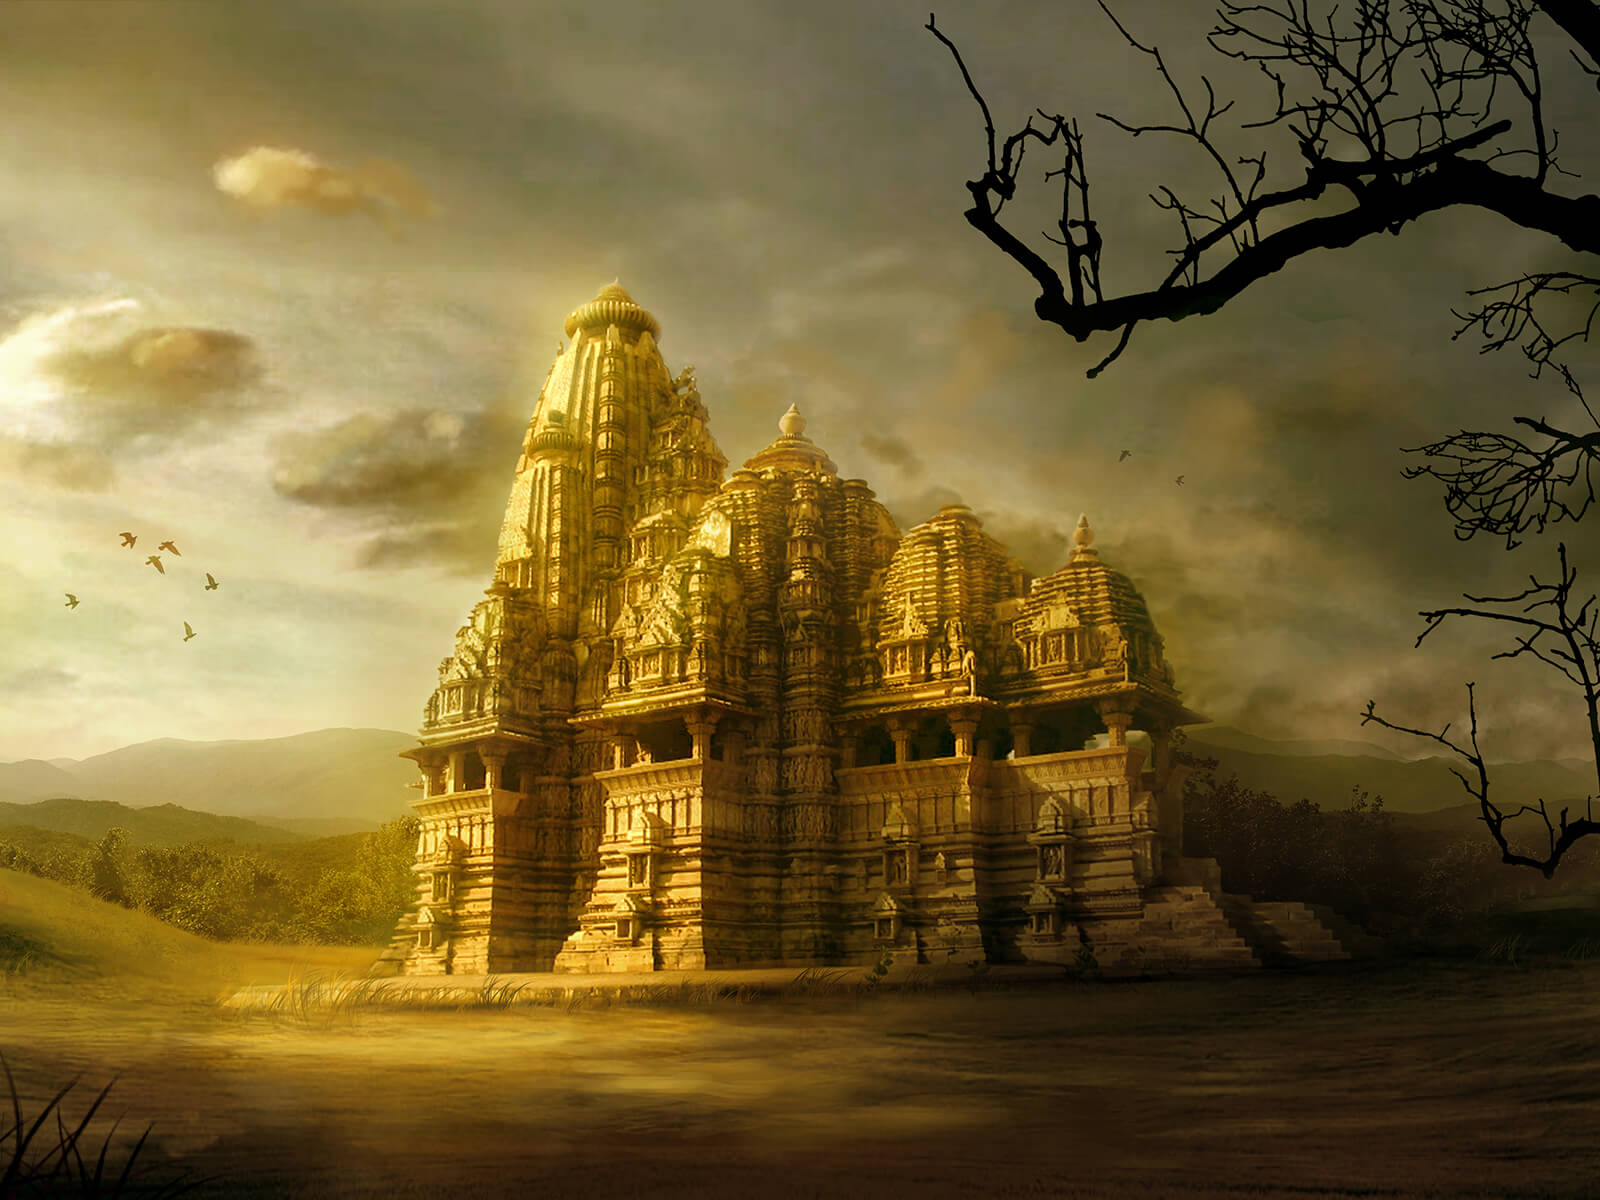 An ornate, abandoned stone temple standing in a grassy clearing, glowing gold in the sunlight.